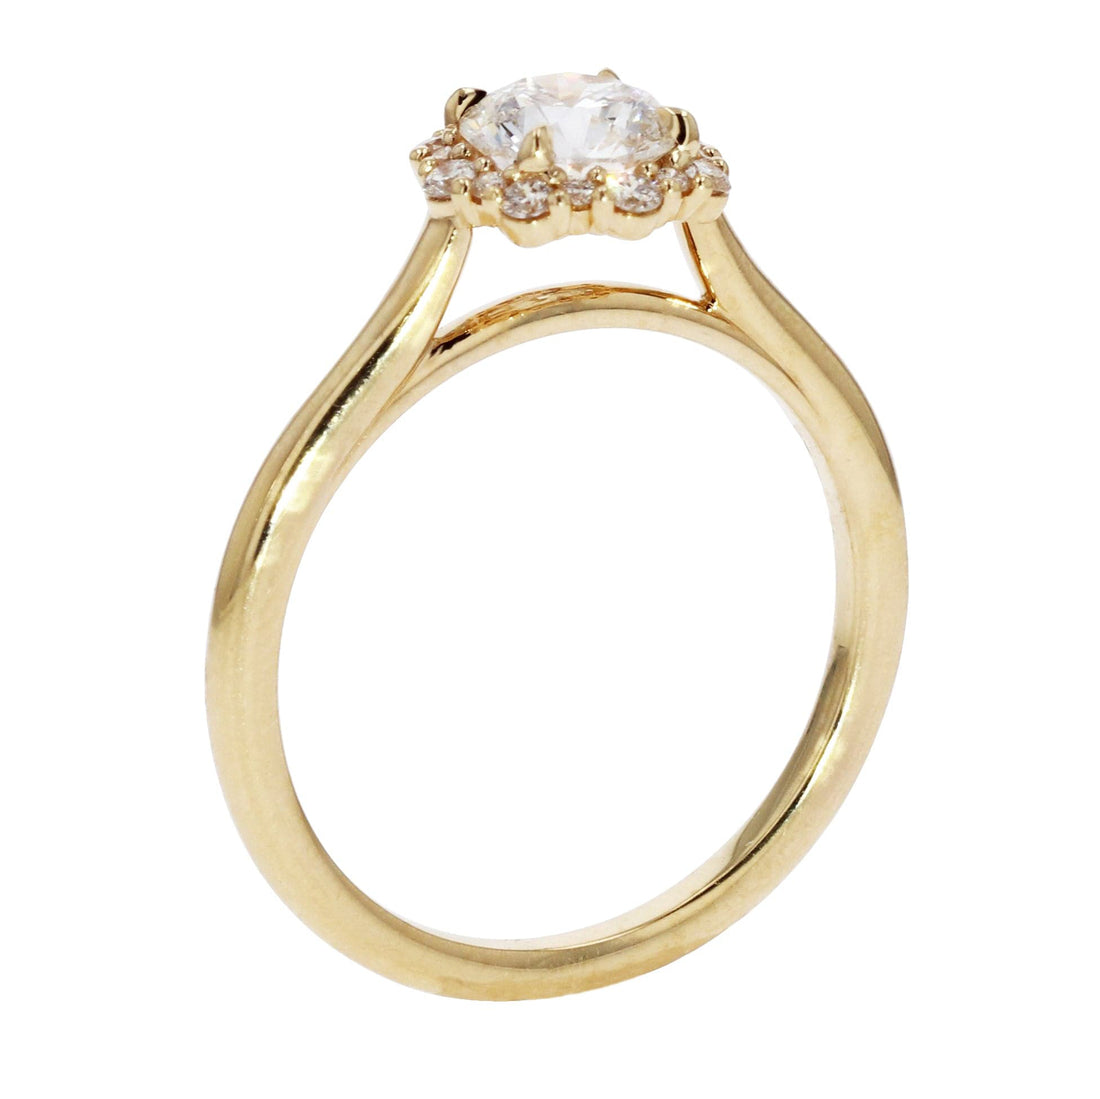 De Beers Forevermark 'Center of My Universe' Engagement Ring - Skeie's Jewelers